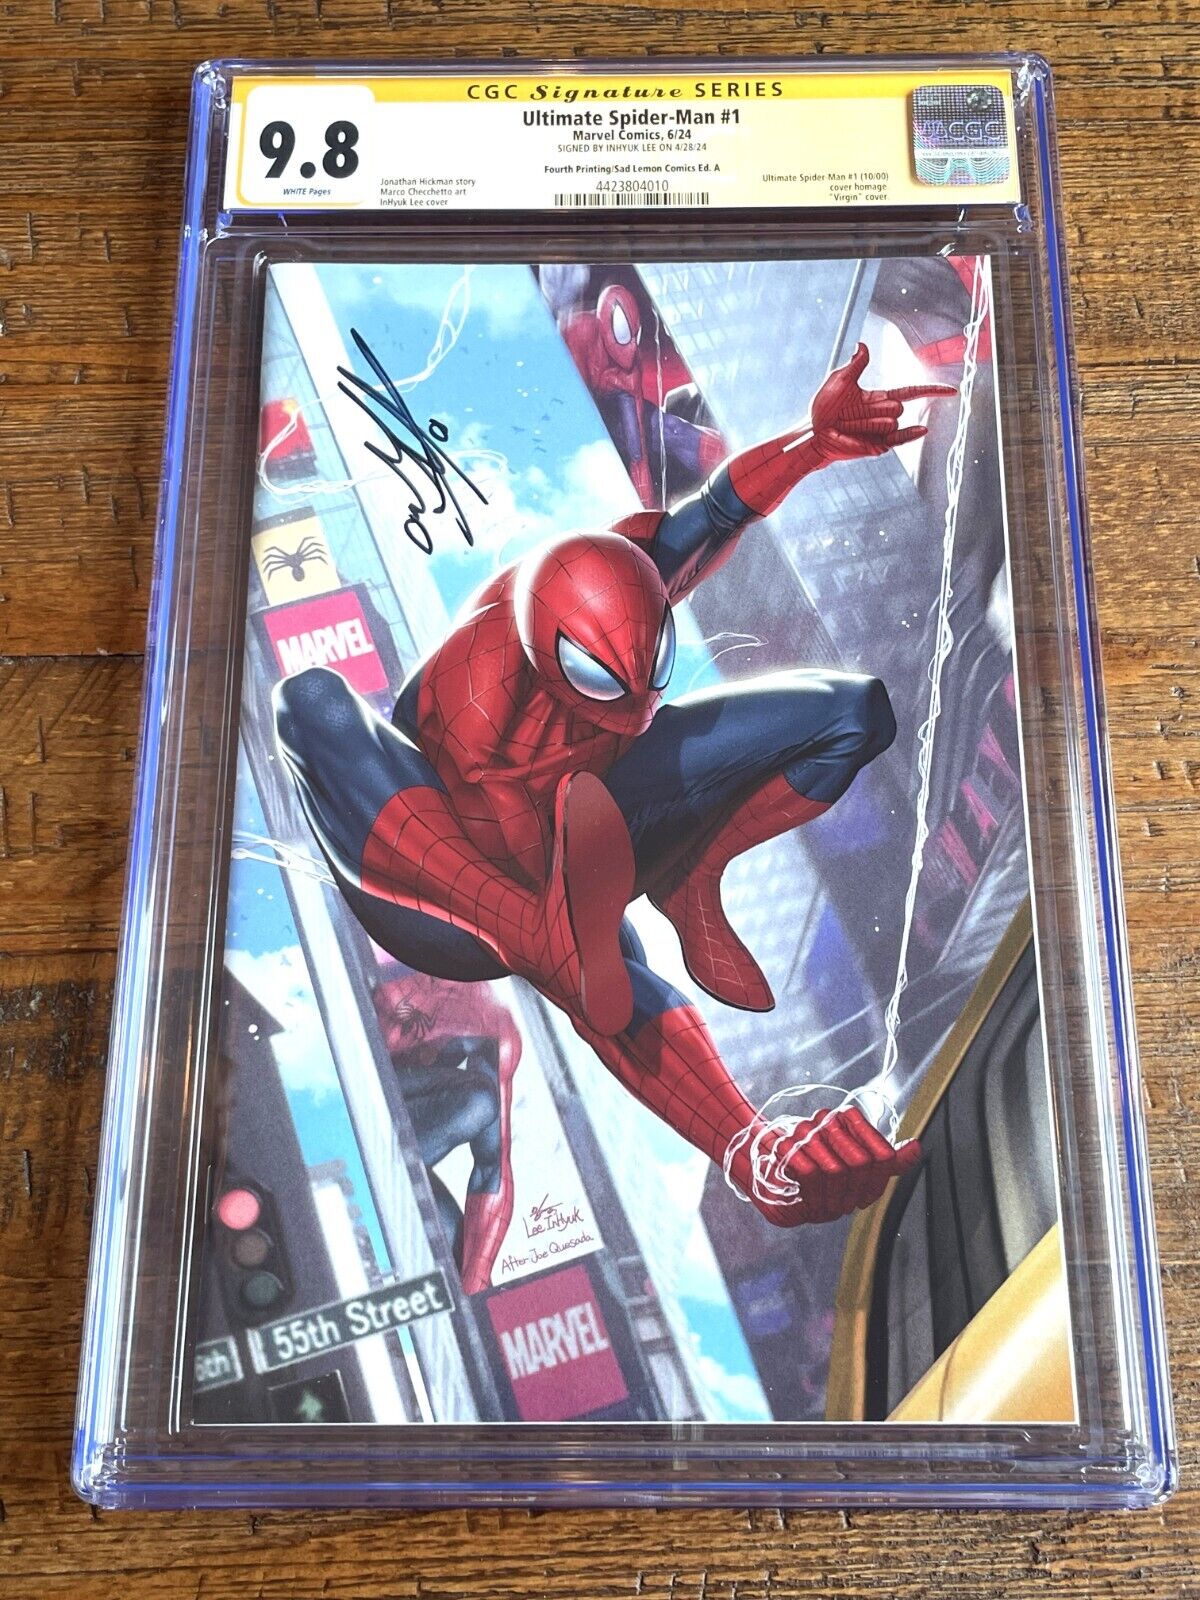 ULTIMATE SPIDER-MAN #1 CGC SS 9.8 INHYUK LEE SIGNED RED VIRGIN VARIANT 4th PRINT